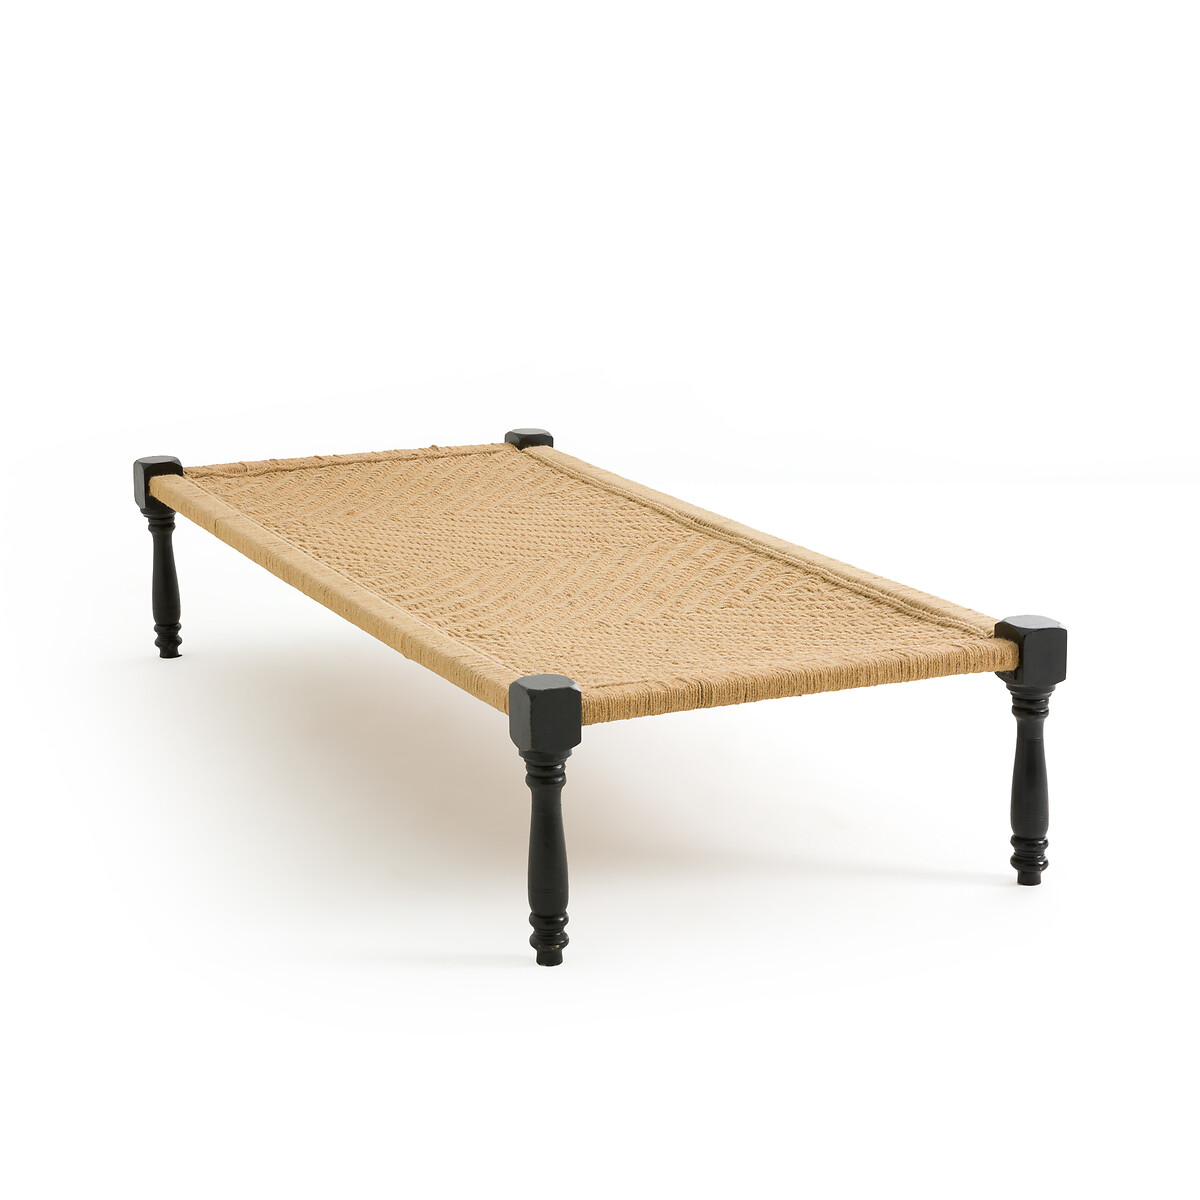 Adas Bench/Indian Bed in Wood and Rope